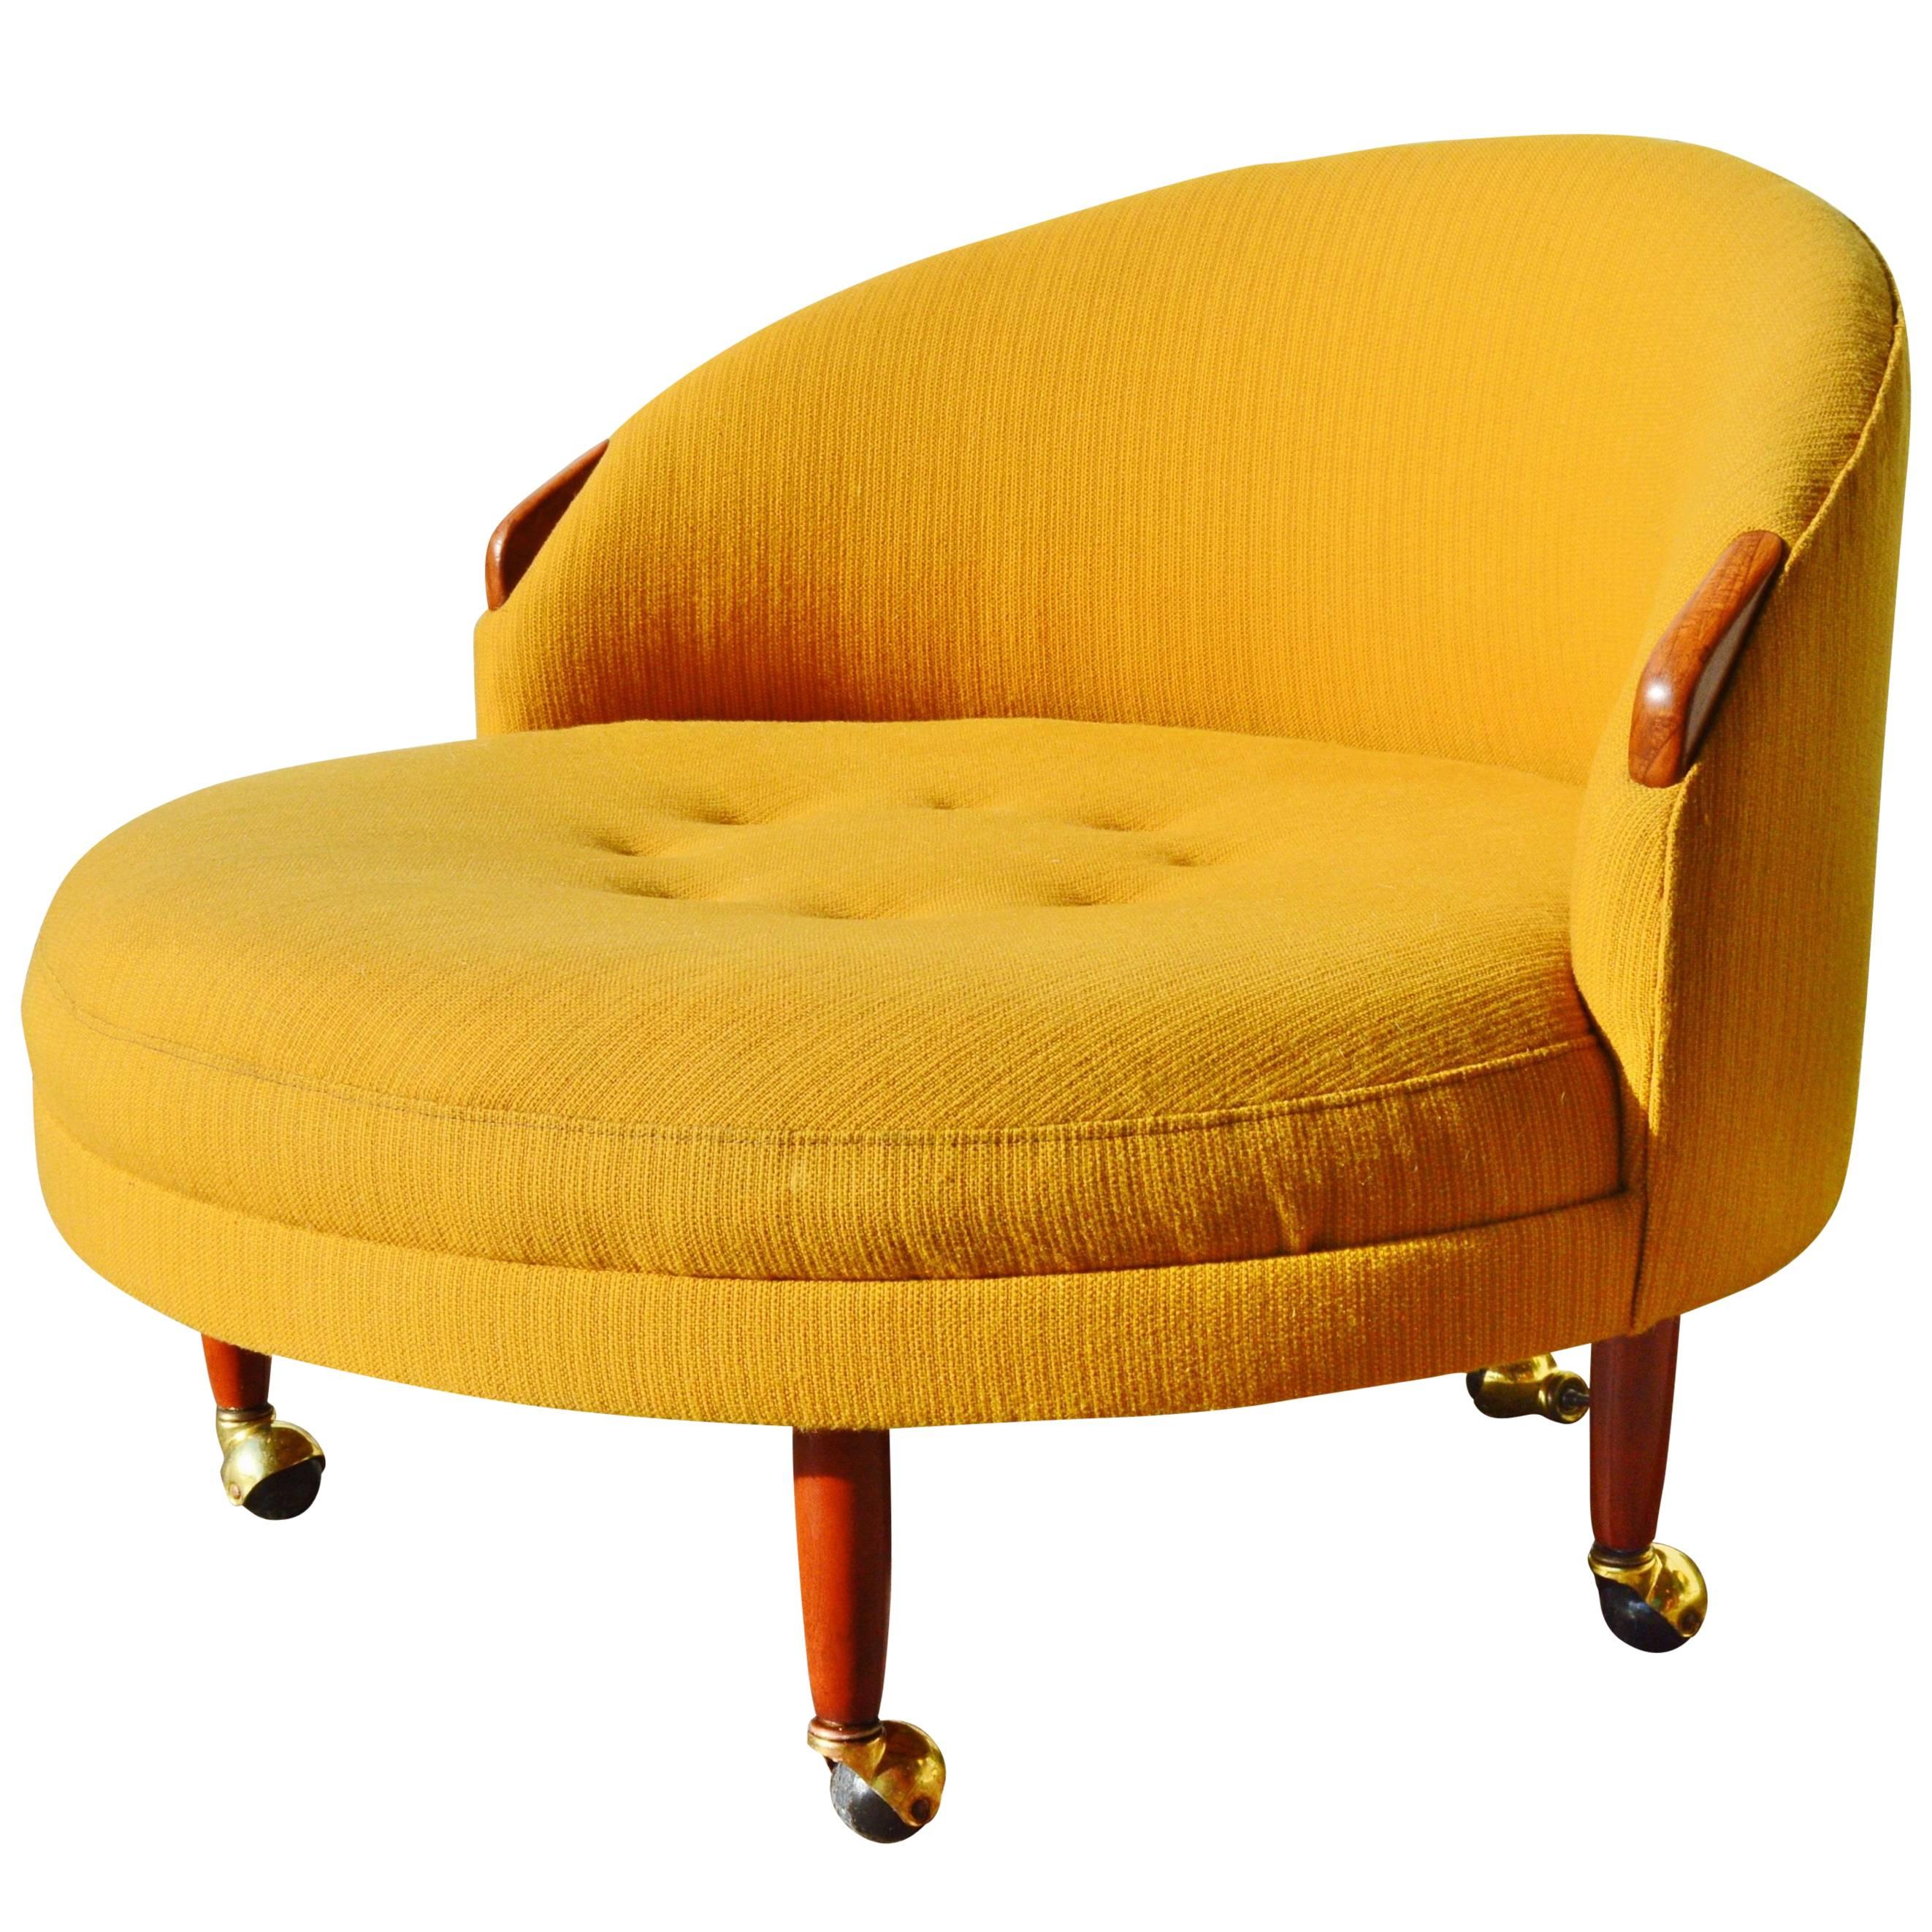 Adrian Pearsall Havana Round Chair with Armrests and Legs ‘Craft Associates’